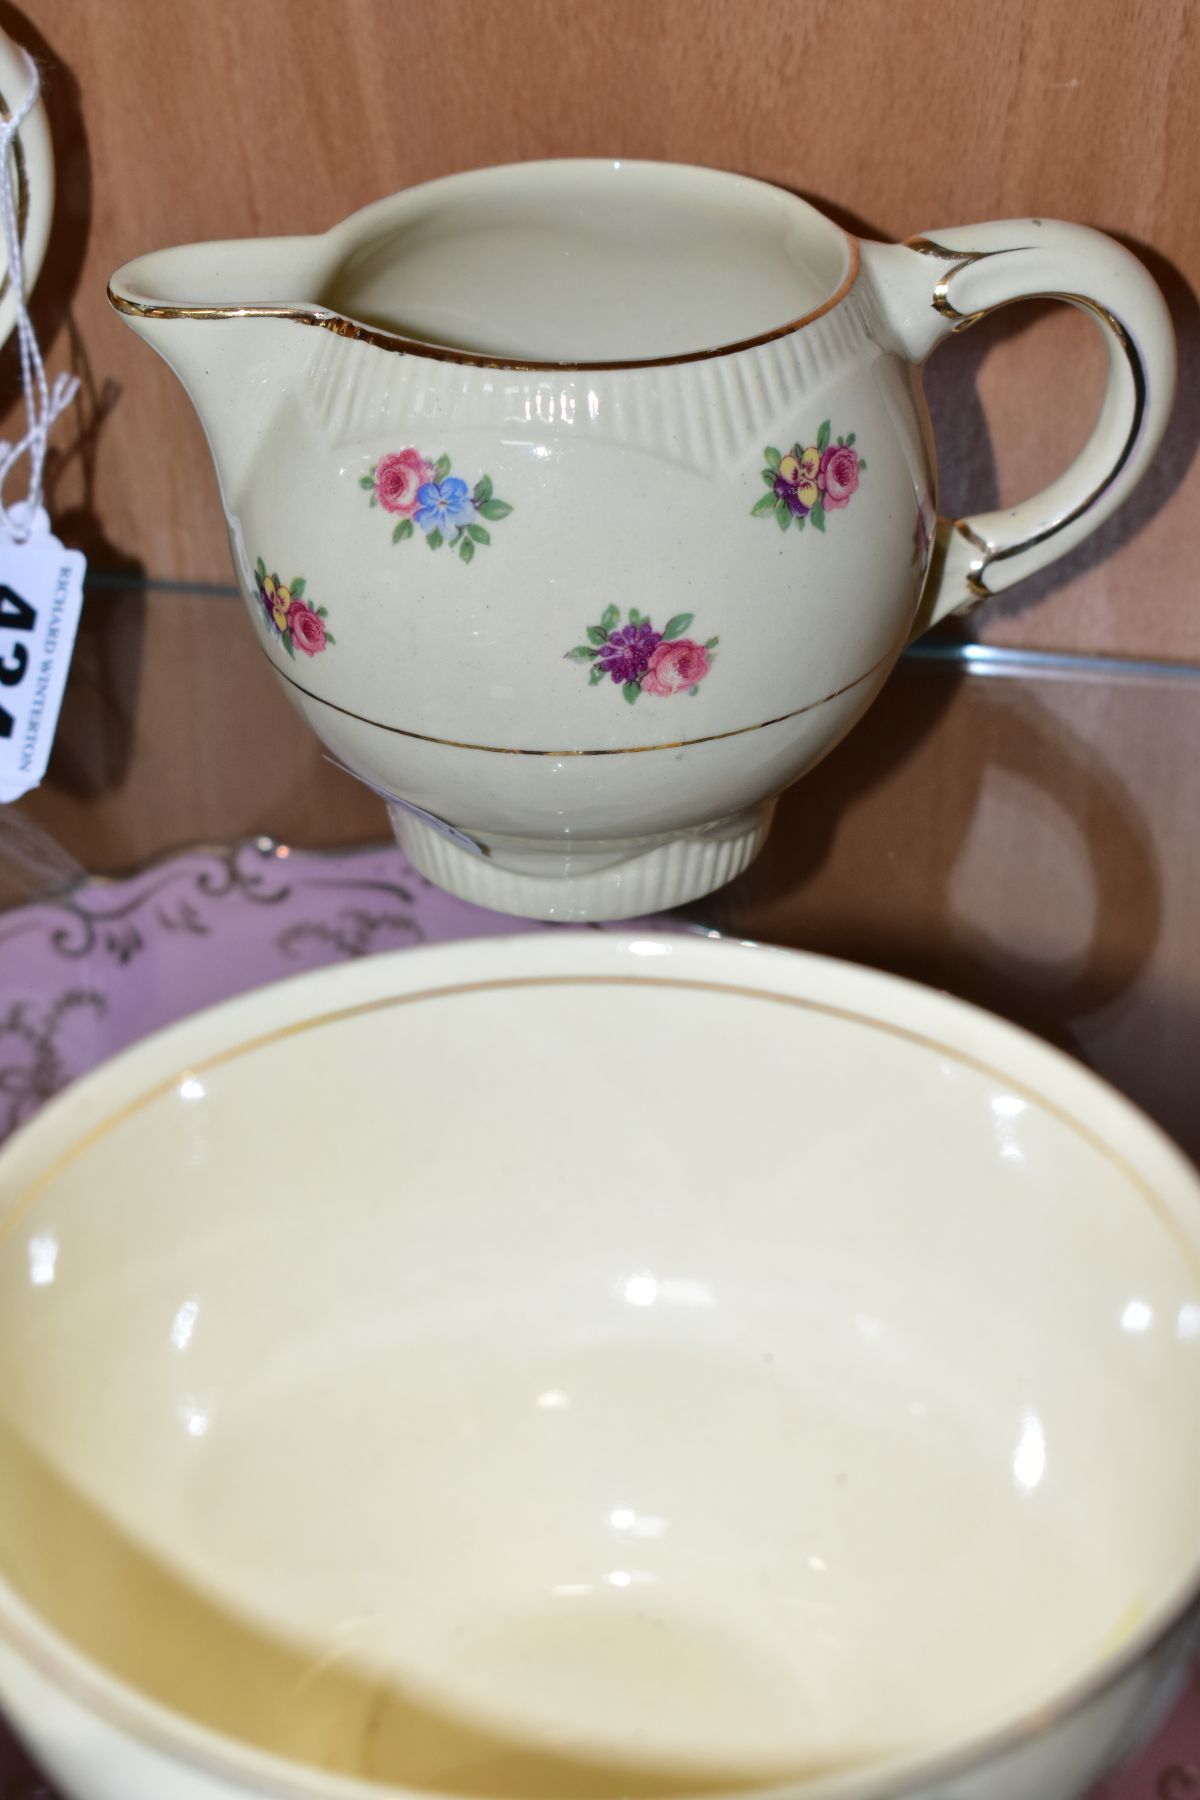 A CLARICE CLIFF NEWPORT POTTERY PART TEA SET, transfer printed with floral sprays, Reg no 840076, - Image 3 of 8